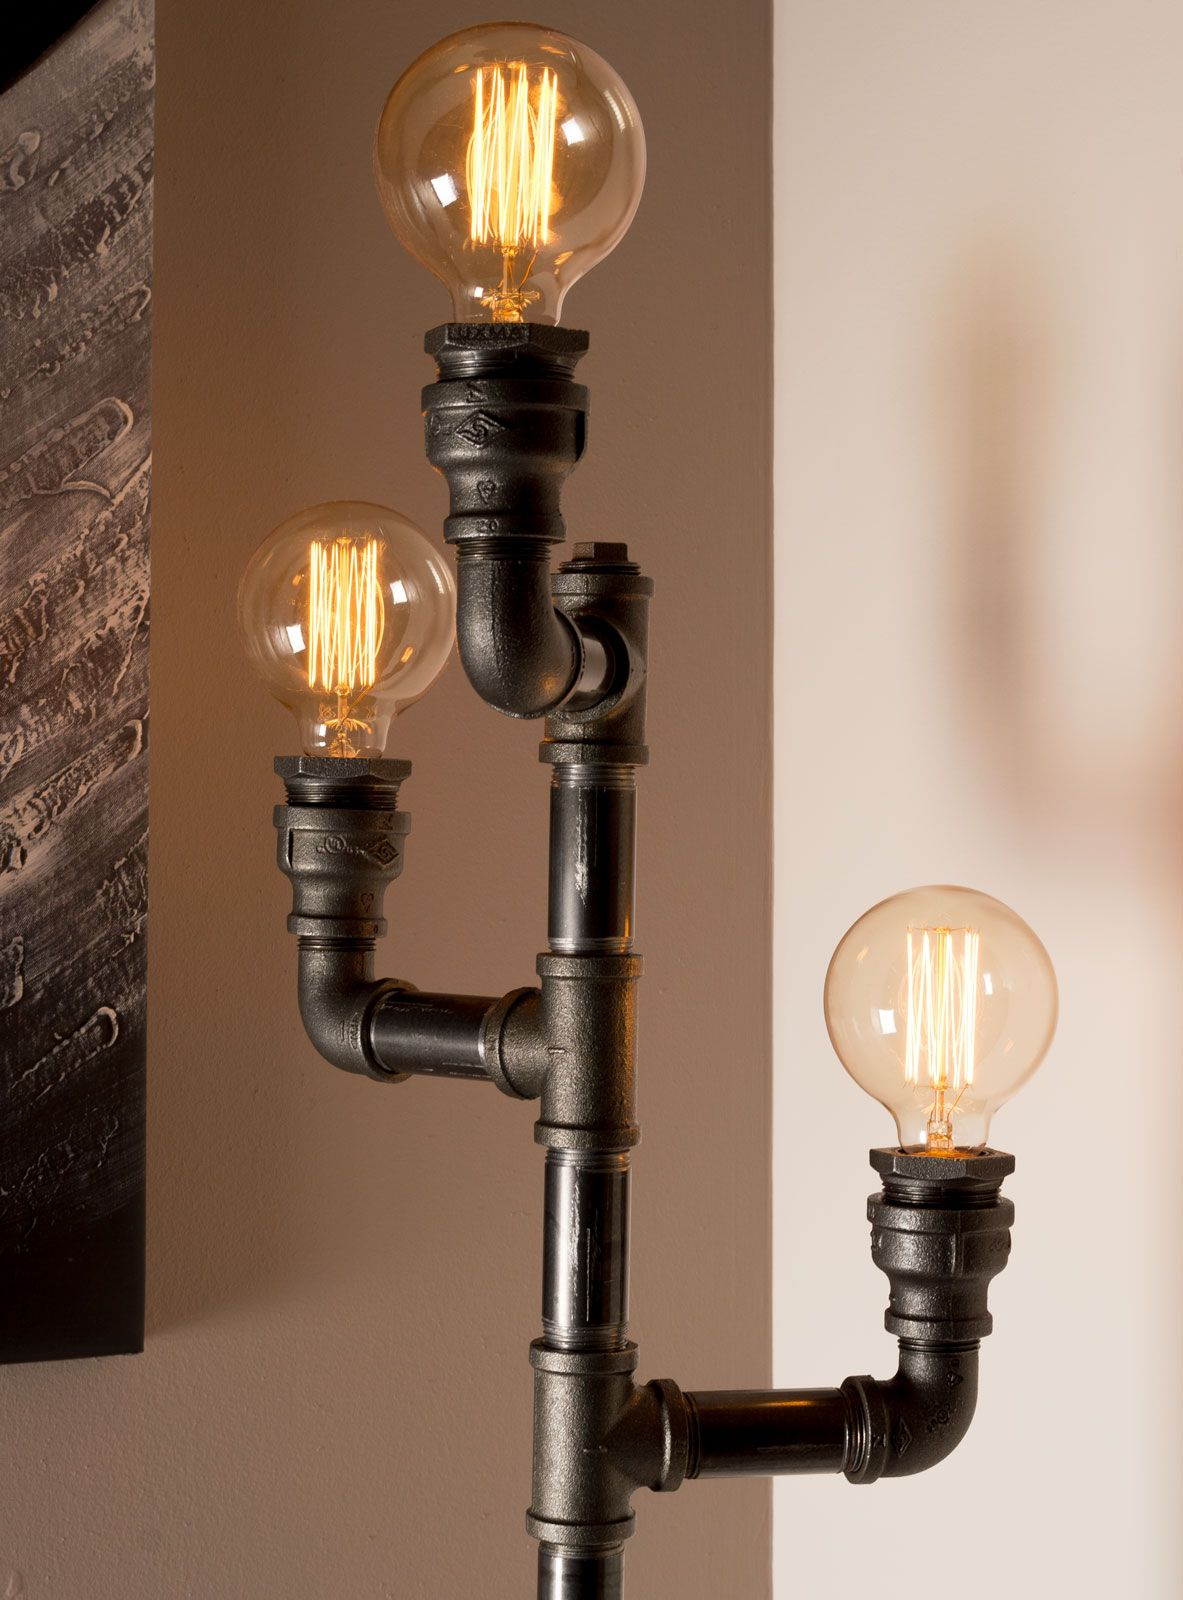 Steampunk Design Home Floor Lamps Perfect Lamp For Your with regard to size 1183 X 1600